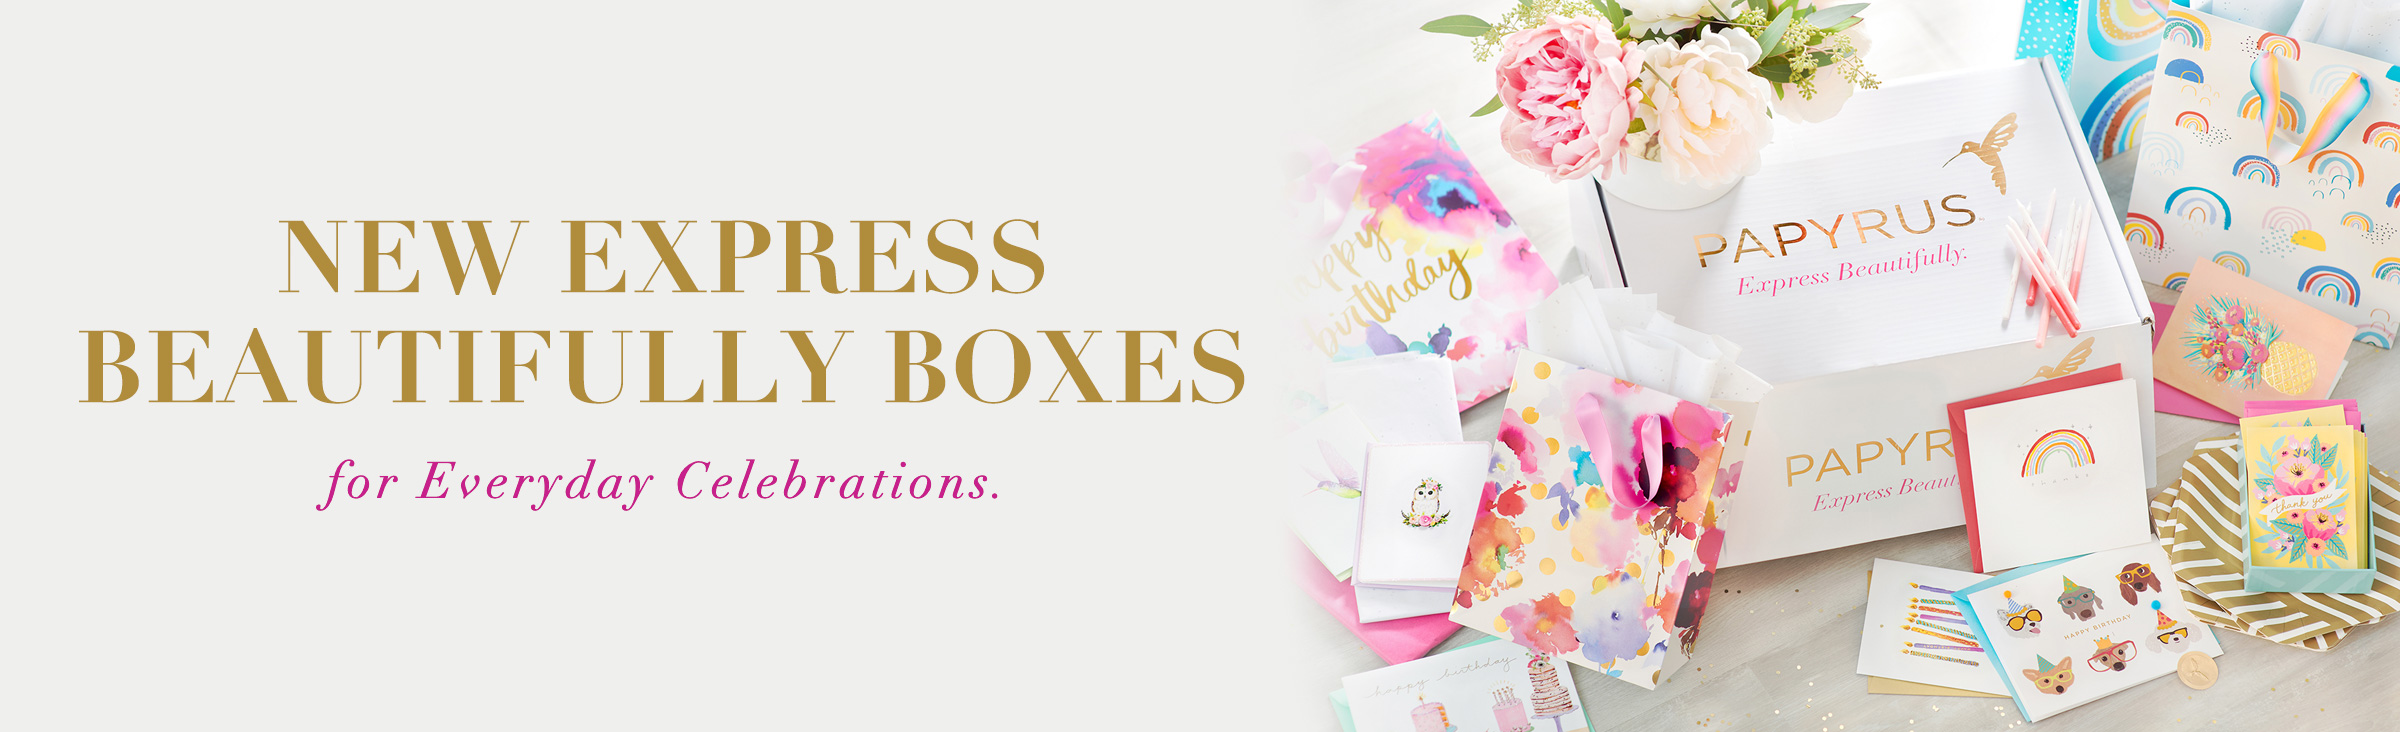 Express Beautifully Boxes for Everyday Celebrations